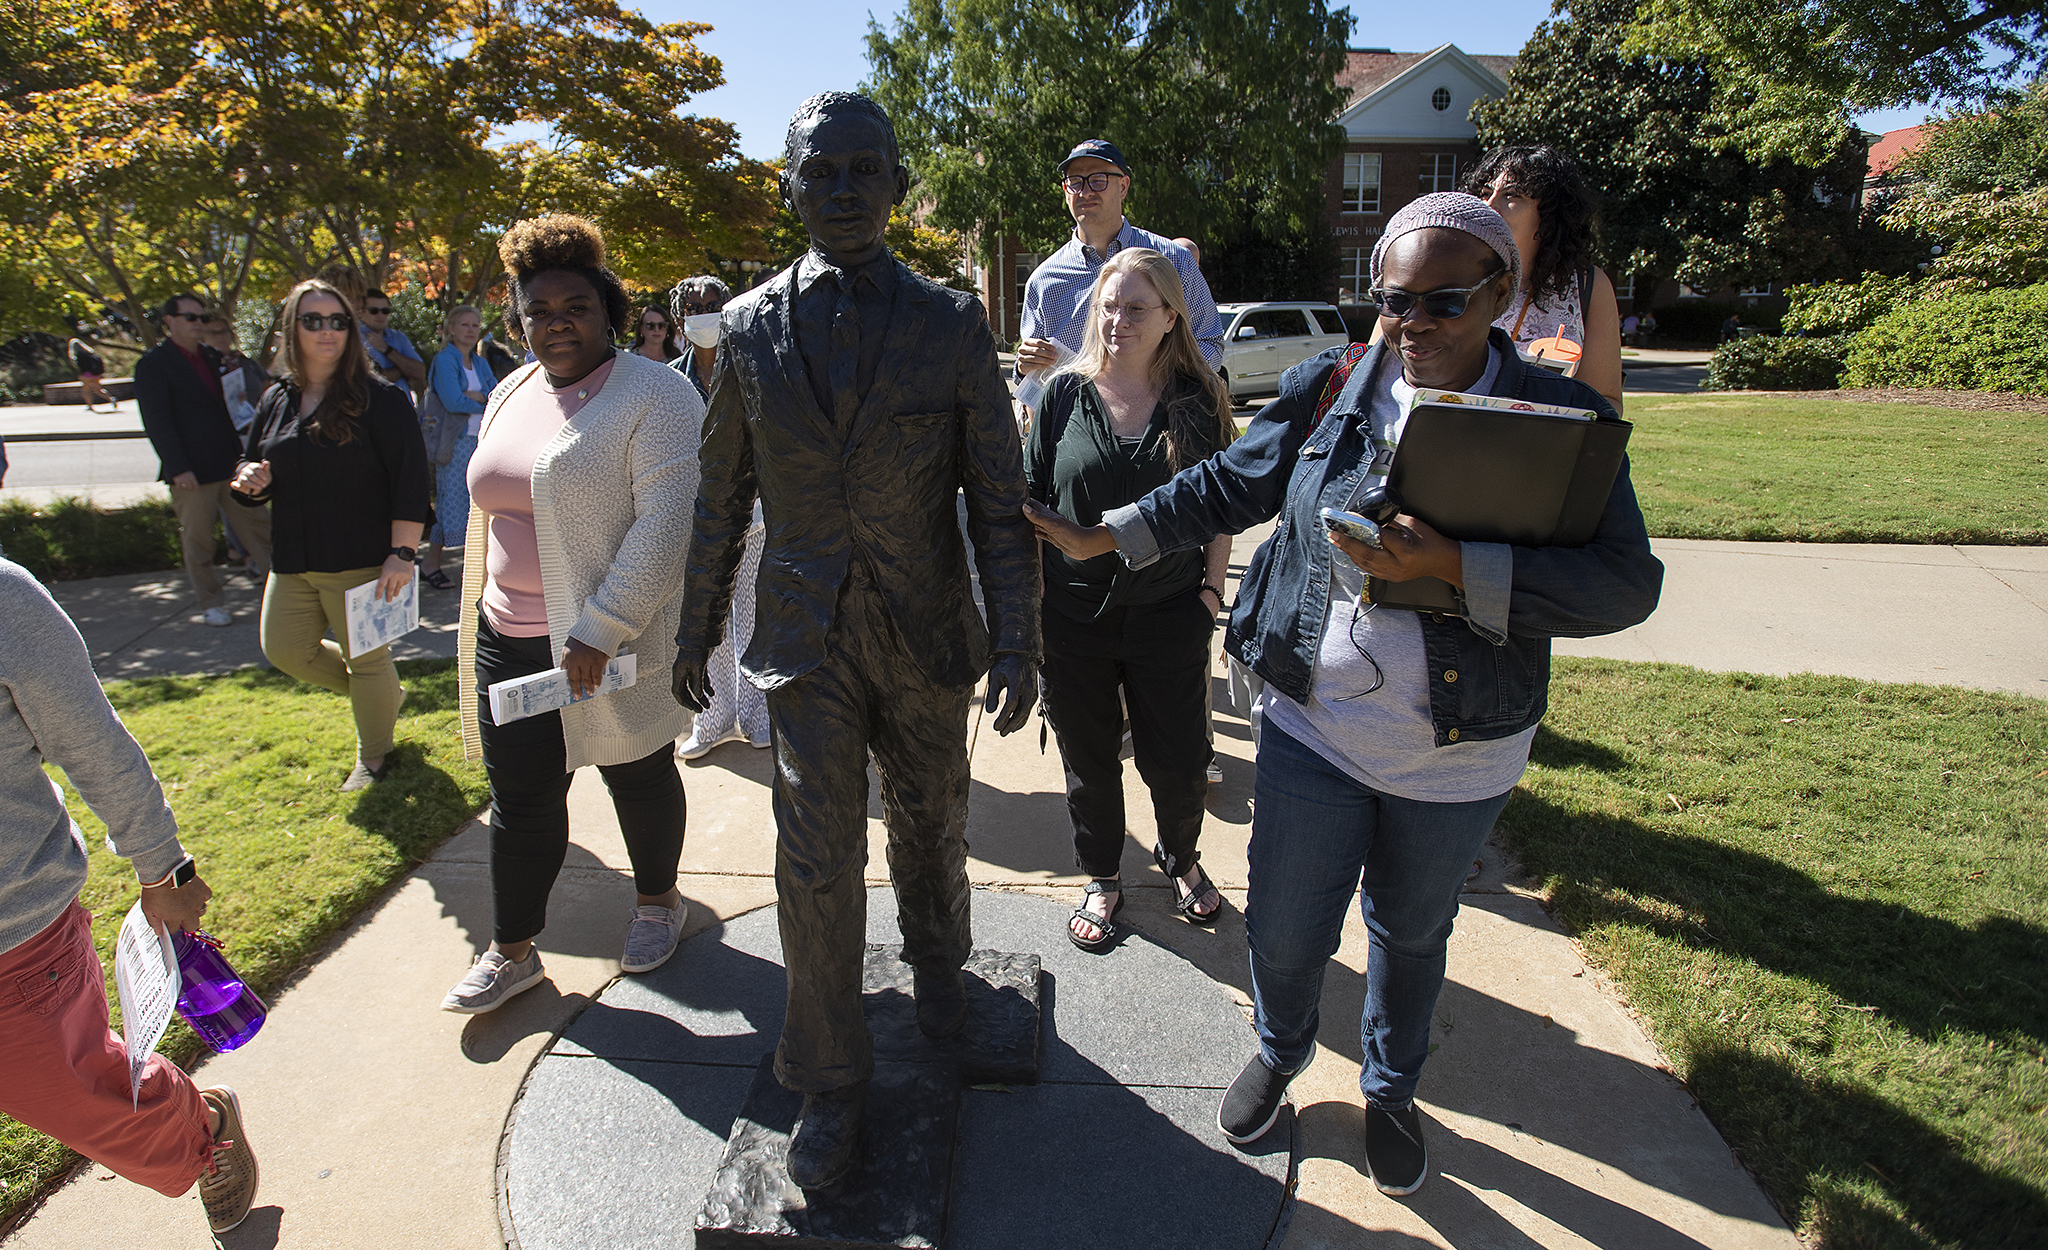 Rhondalyn Peairs (right) touches the statue of James Meredith near the Lyceum during a tour. Photo by Thomas Graning/Ole Miss Digital Imaging Services